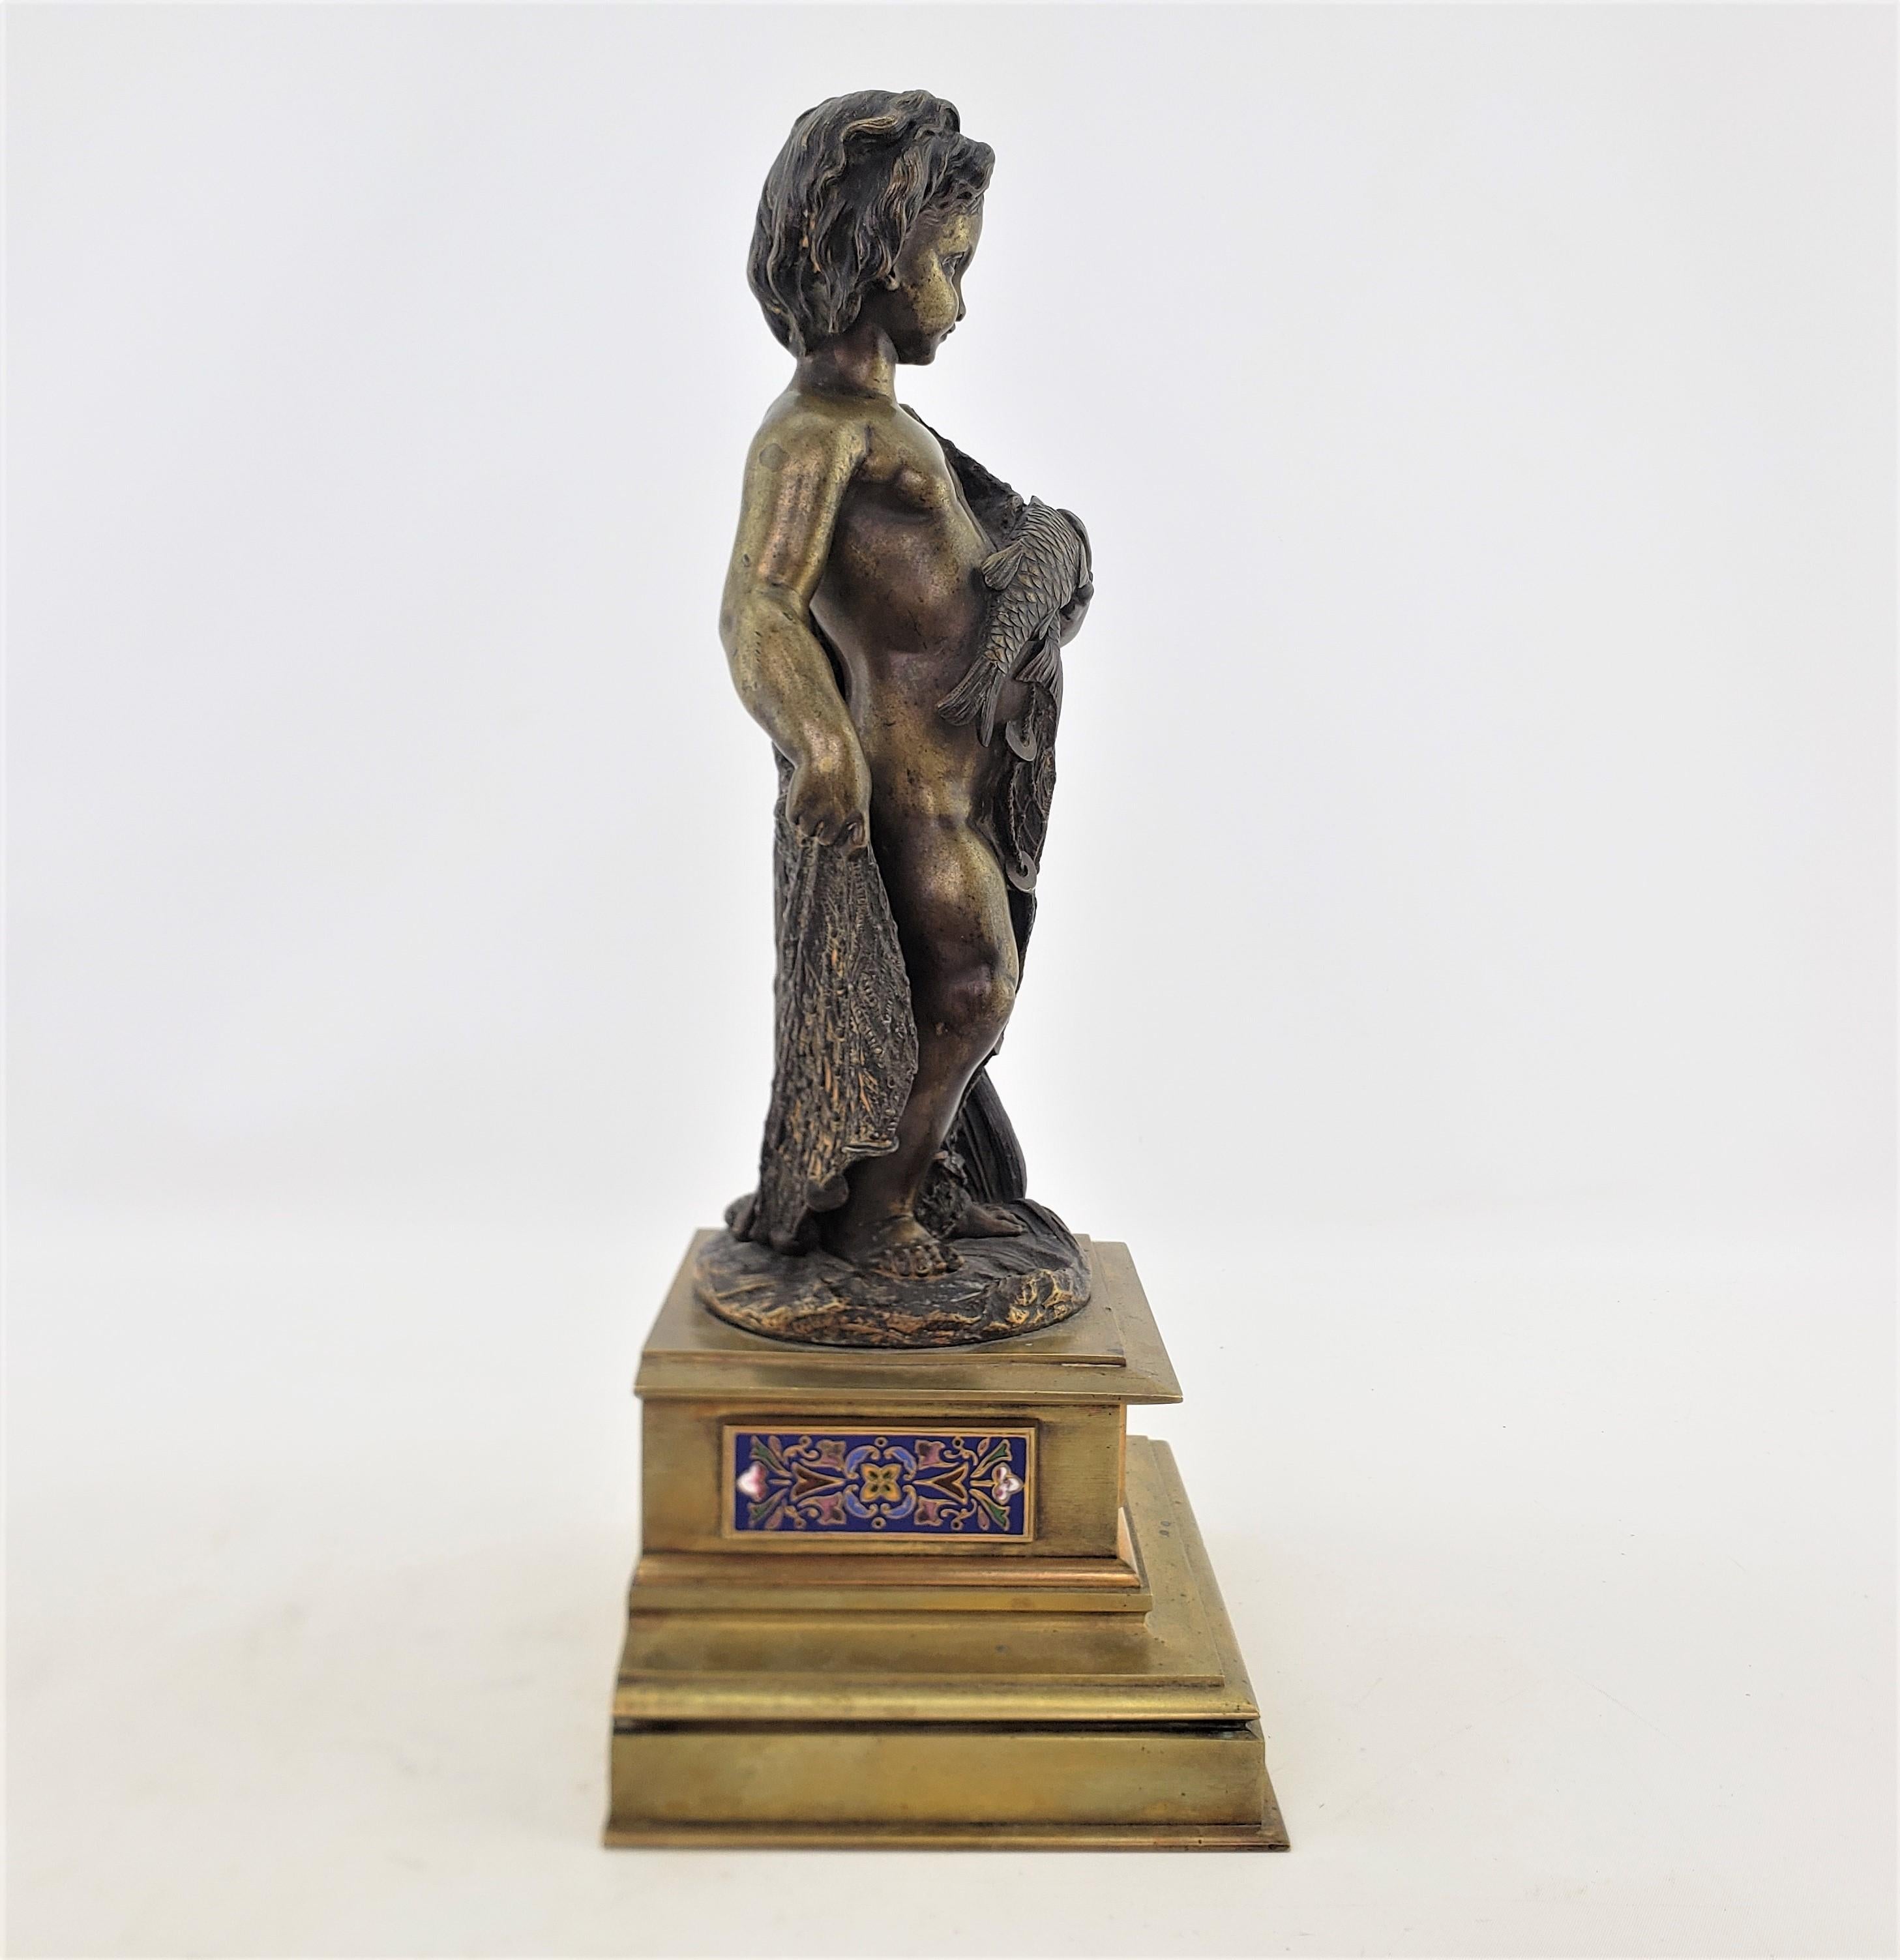 Antique Bronze Sculpture of a Child Draped with a Fish Net and Champleve Panels In Good Condition For Sale In Hamilton, Ontario